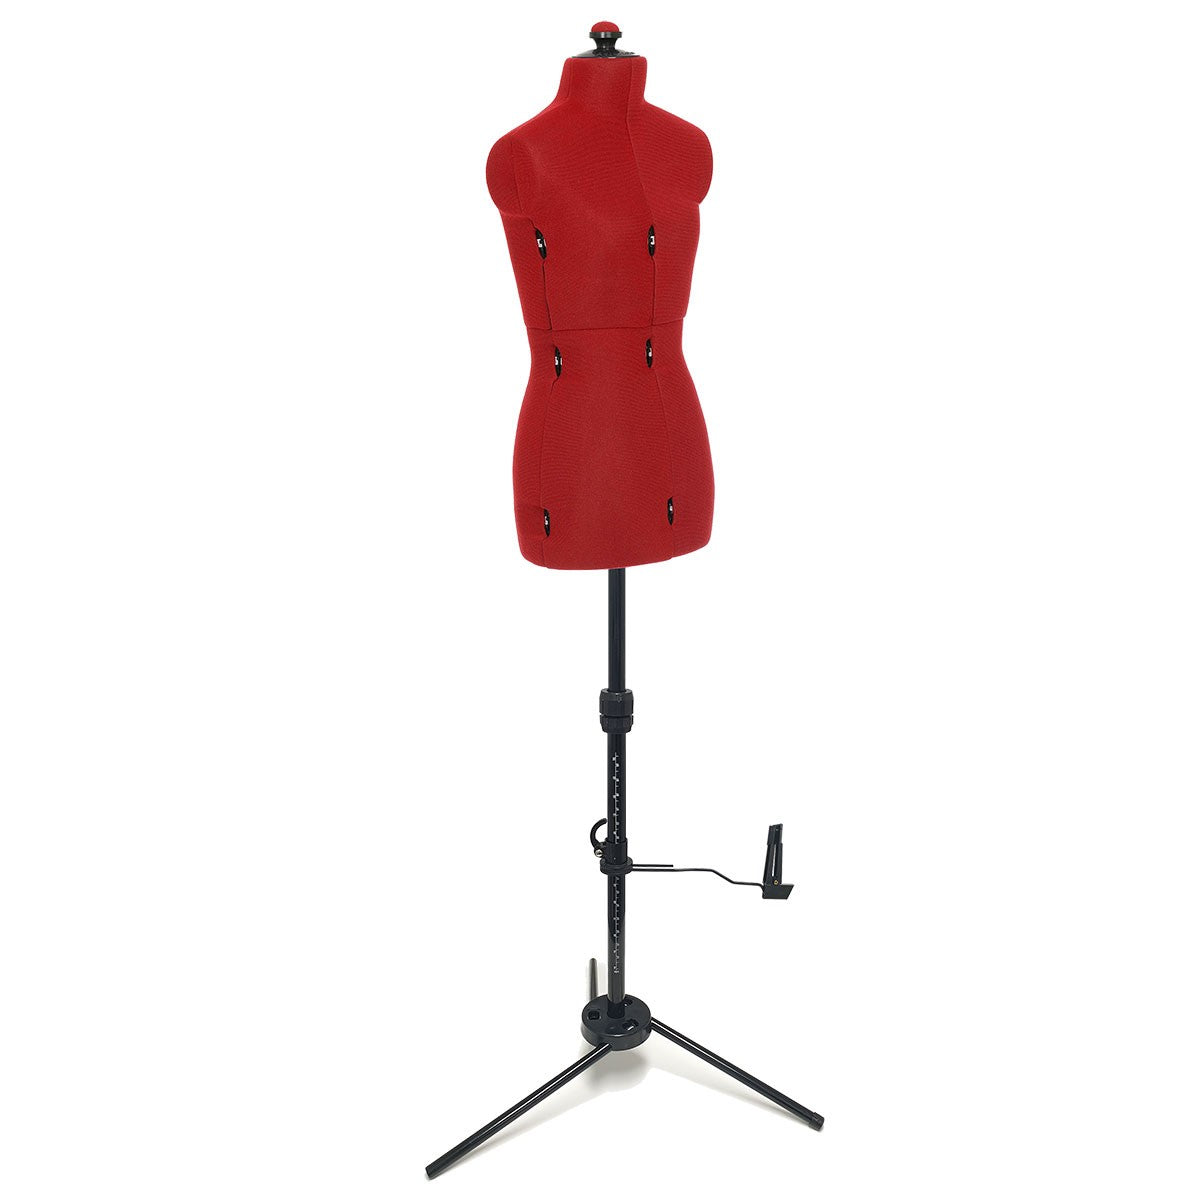 Adjustoform Supa-Fit Classic Dress Form (Cherry Red available in 4 sizes with 12 adjusters * made in the UK *